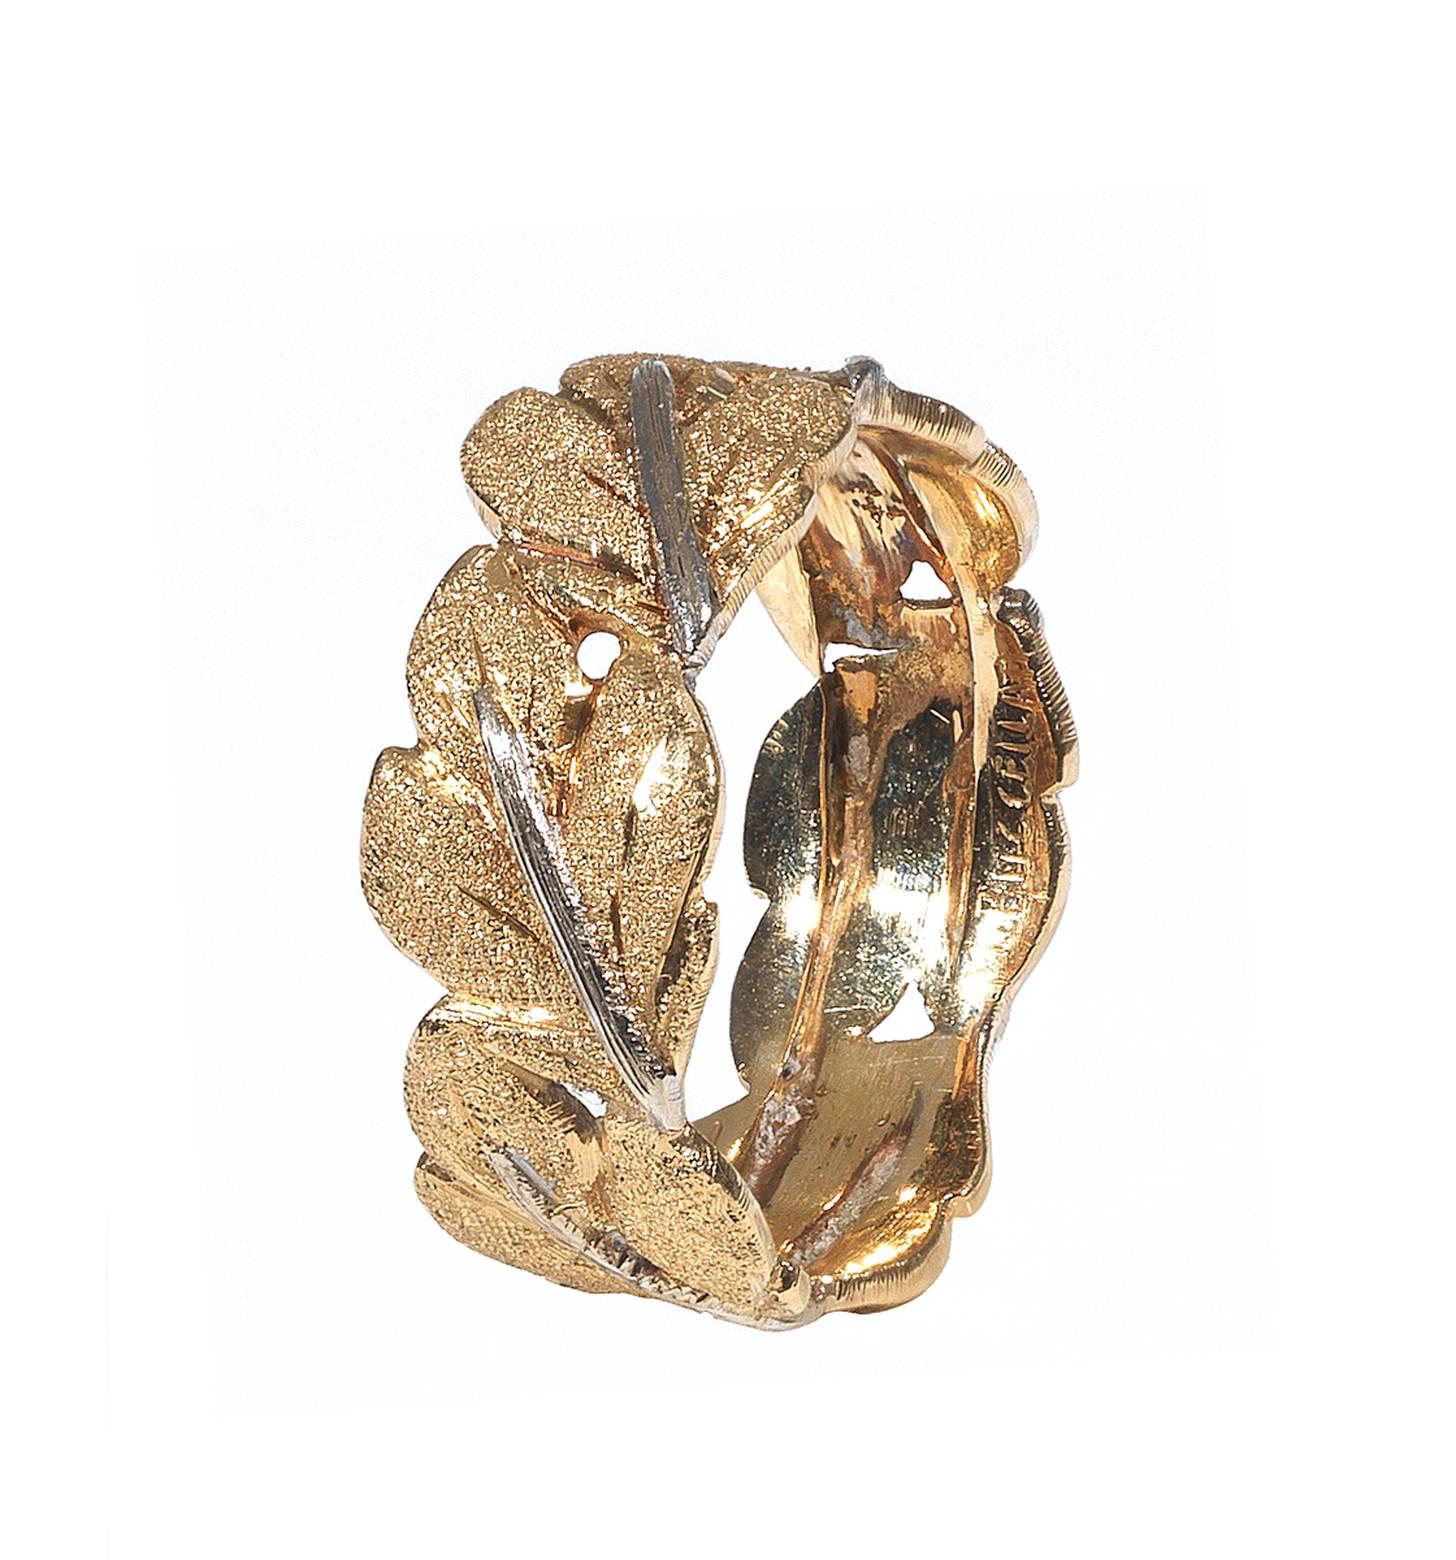 

Finely carved with textured gold curved leaf motifs.

Mounted in 18Kt yellow and white gold.

Signed M. Buccellati

Finger size: 7 3/4 

Weight: 5.6 gr